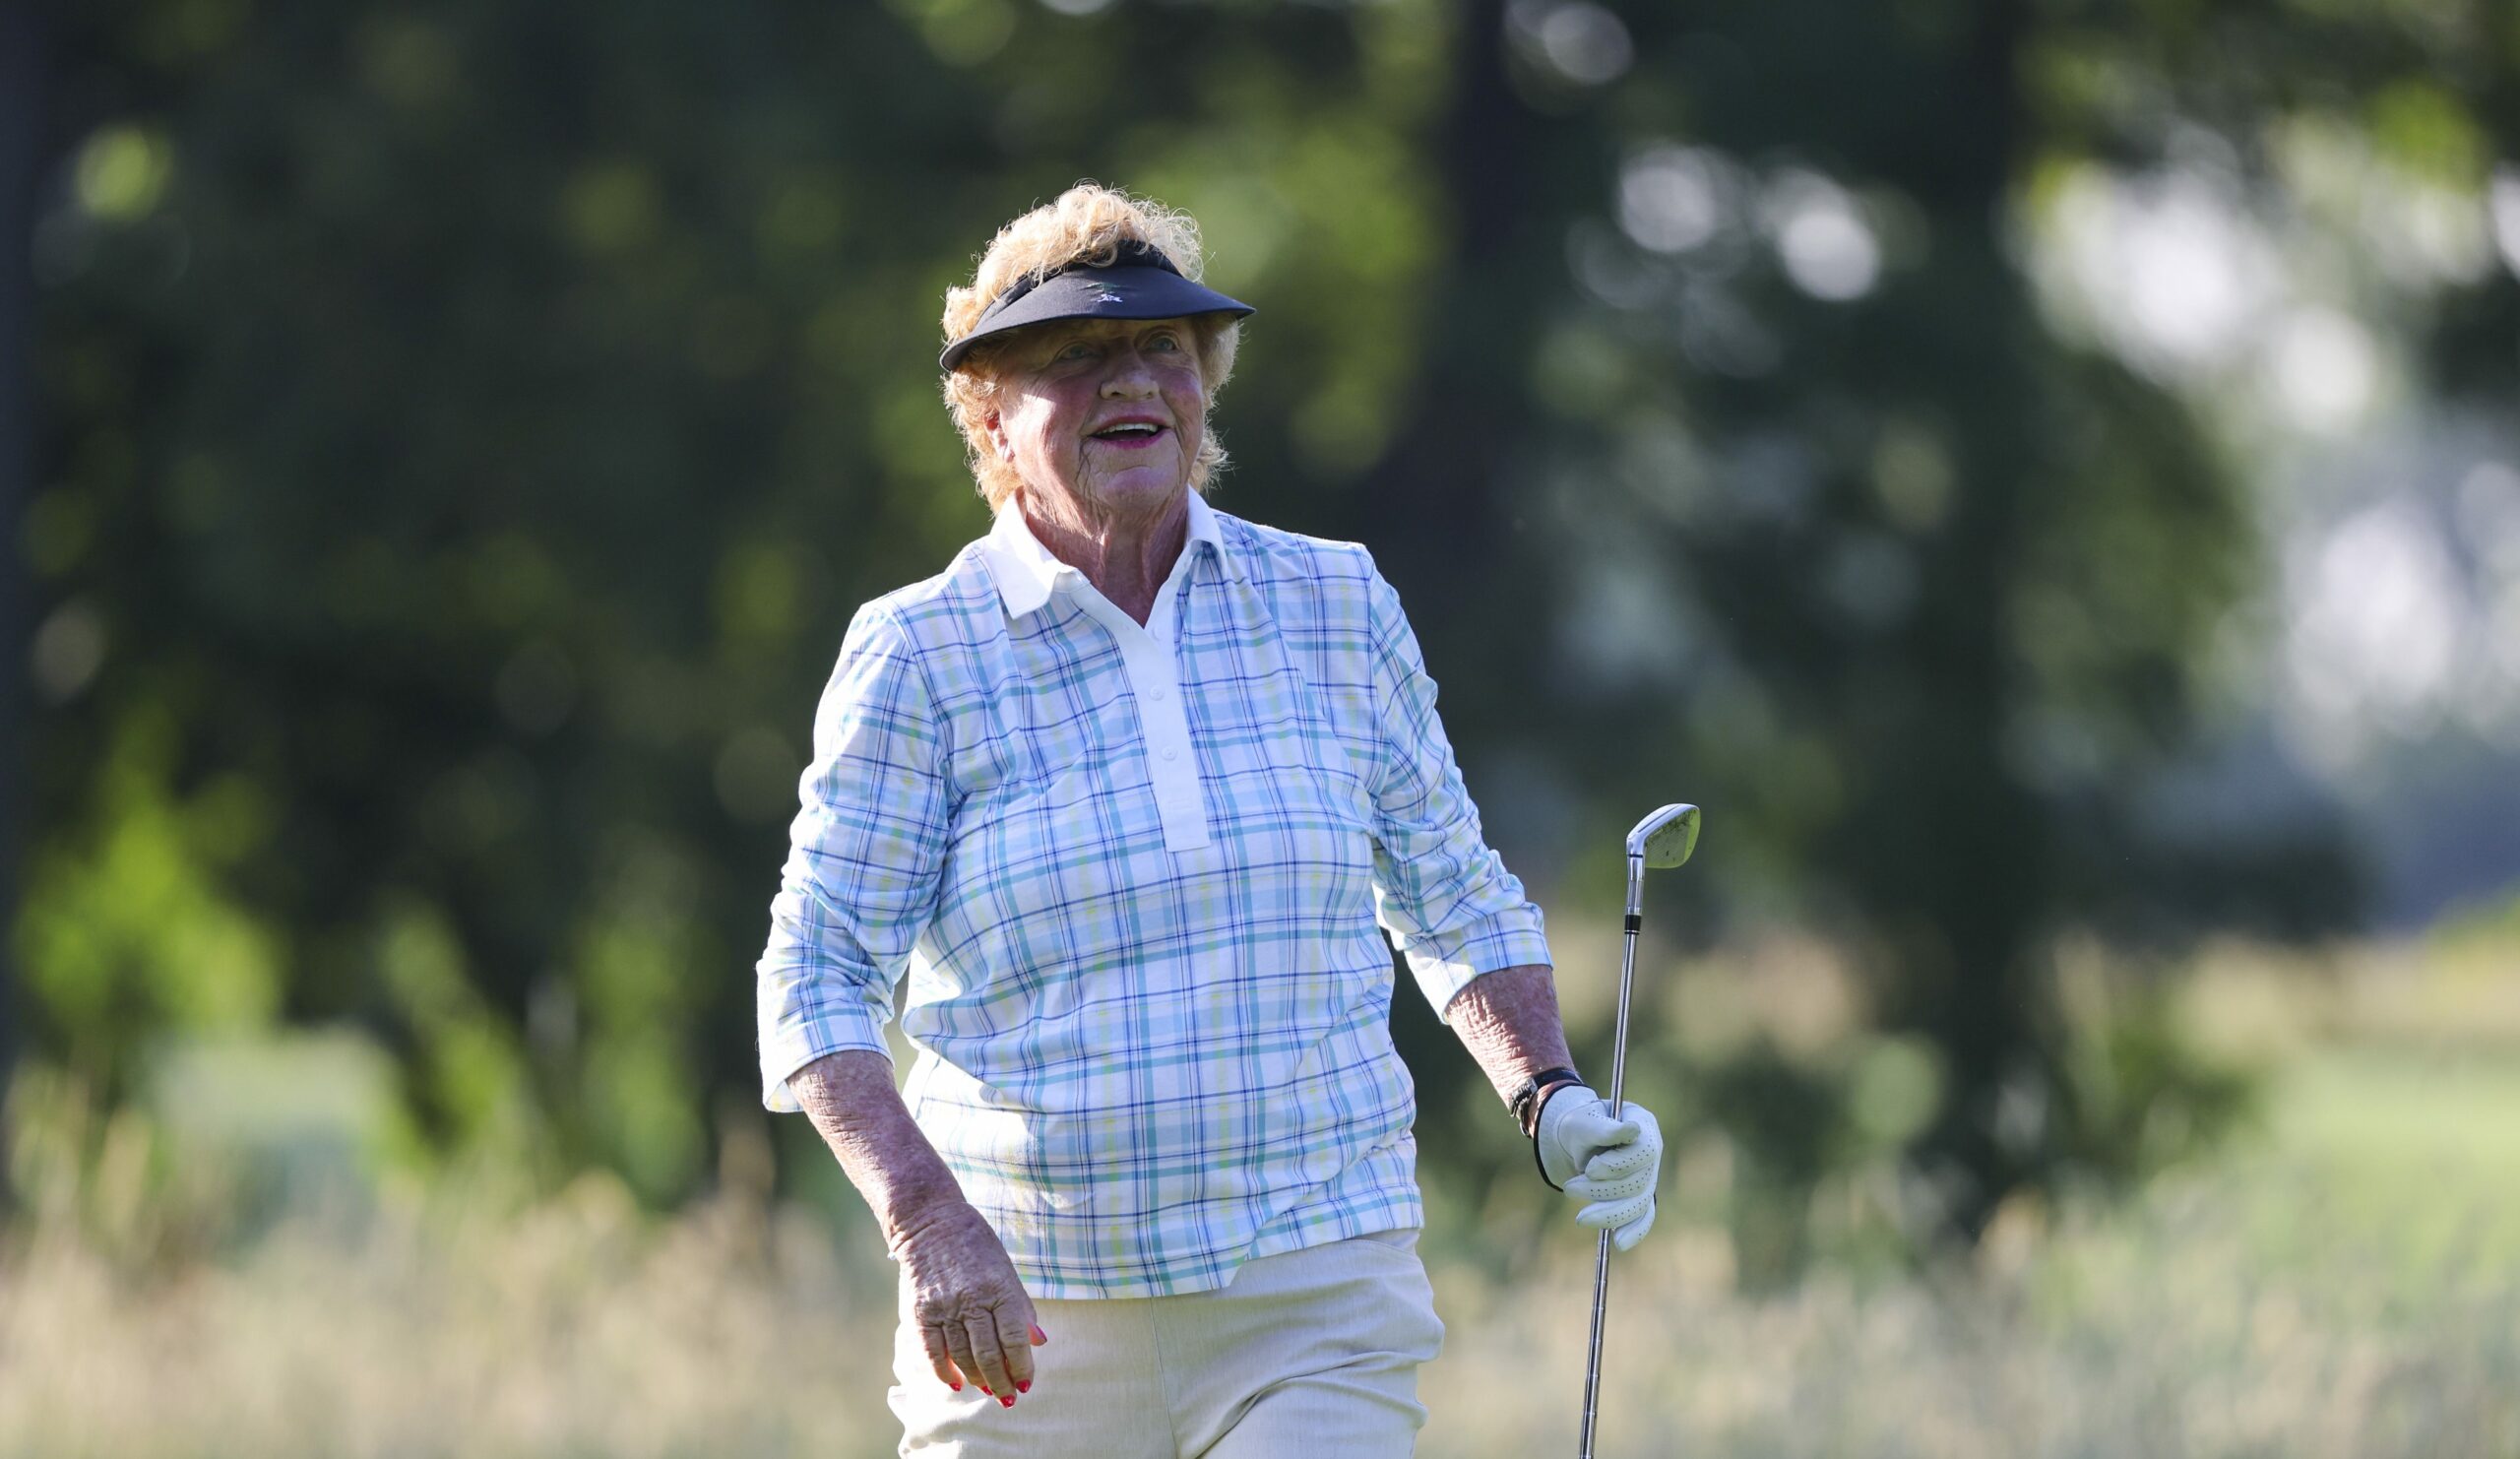 5 things to know about the legendary JoAnne Carner, 83, who says this might be her last U.S. Senior Women’s Open